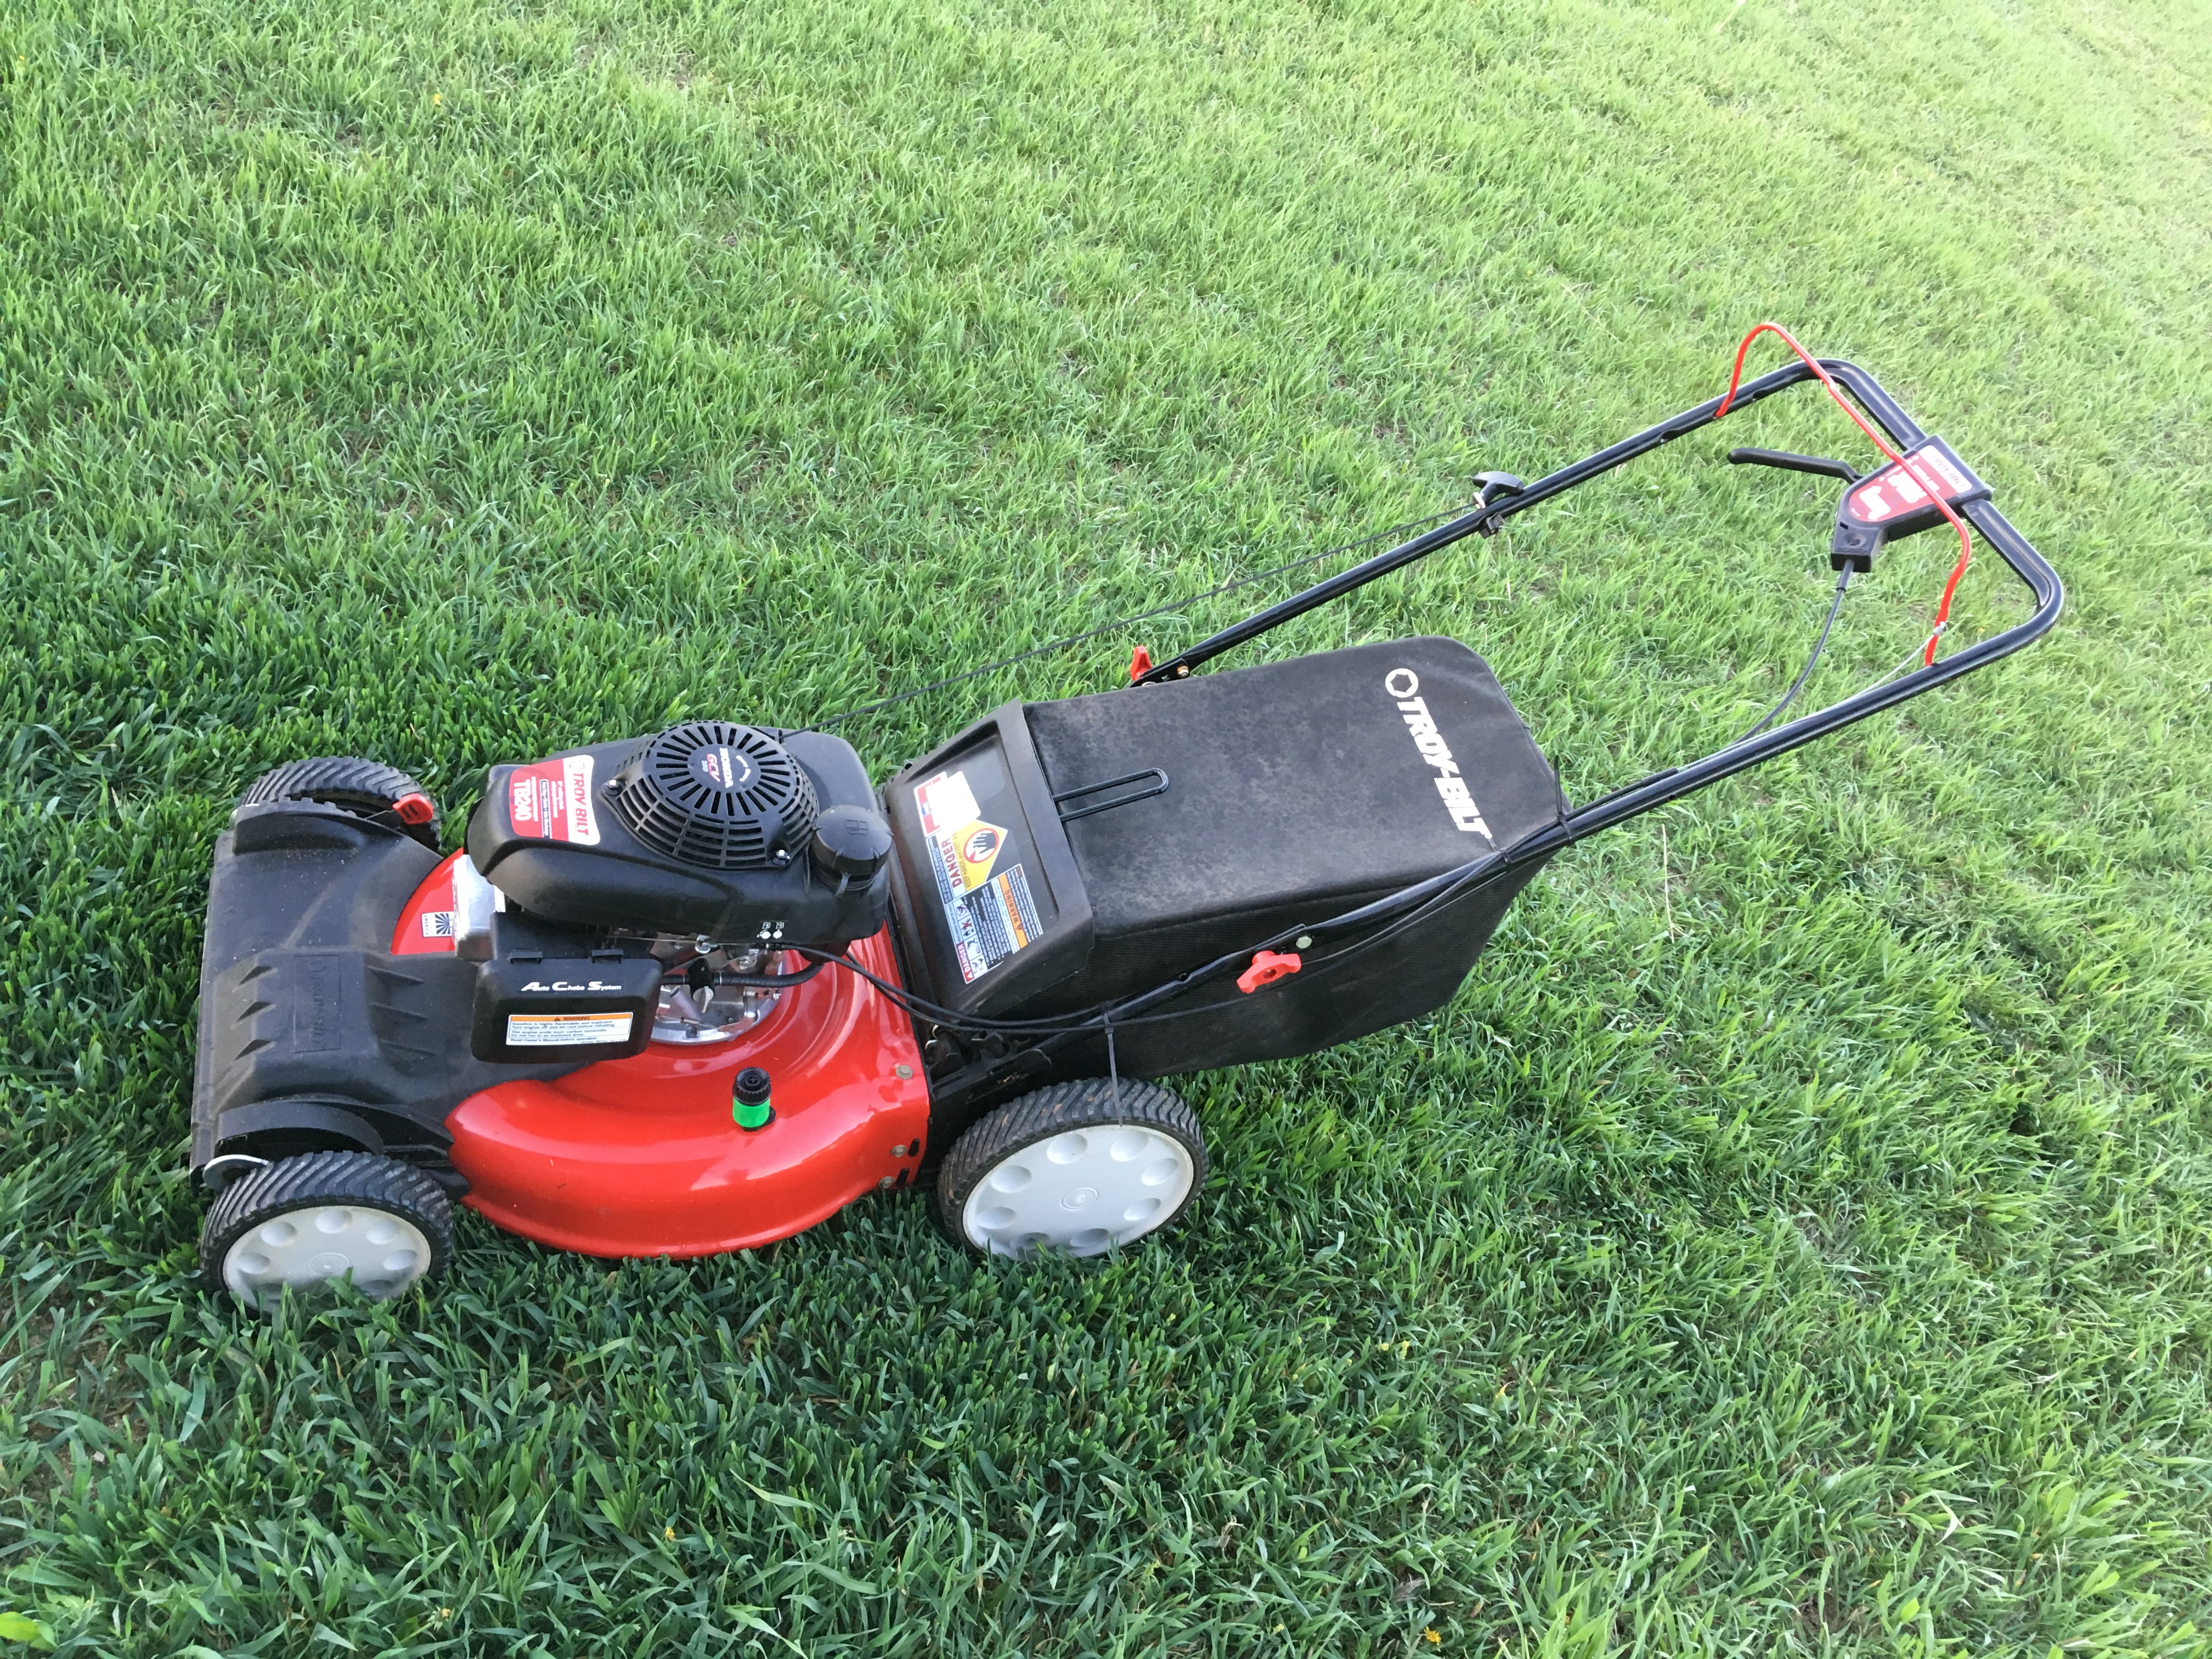 For Sale Excellent Condition Troy Bilt Tb240 21 In Self Propelled Lawn Mower 250 For Sale Wyoming Community Bulletin Boards Forum